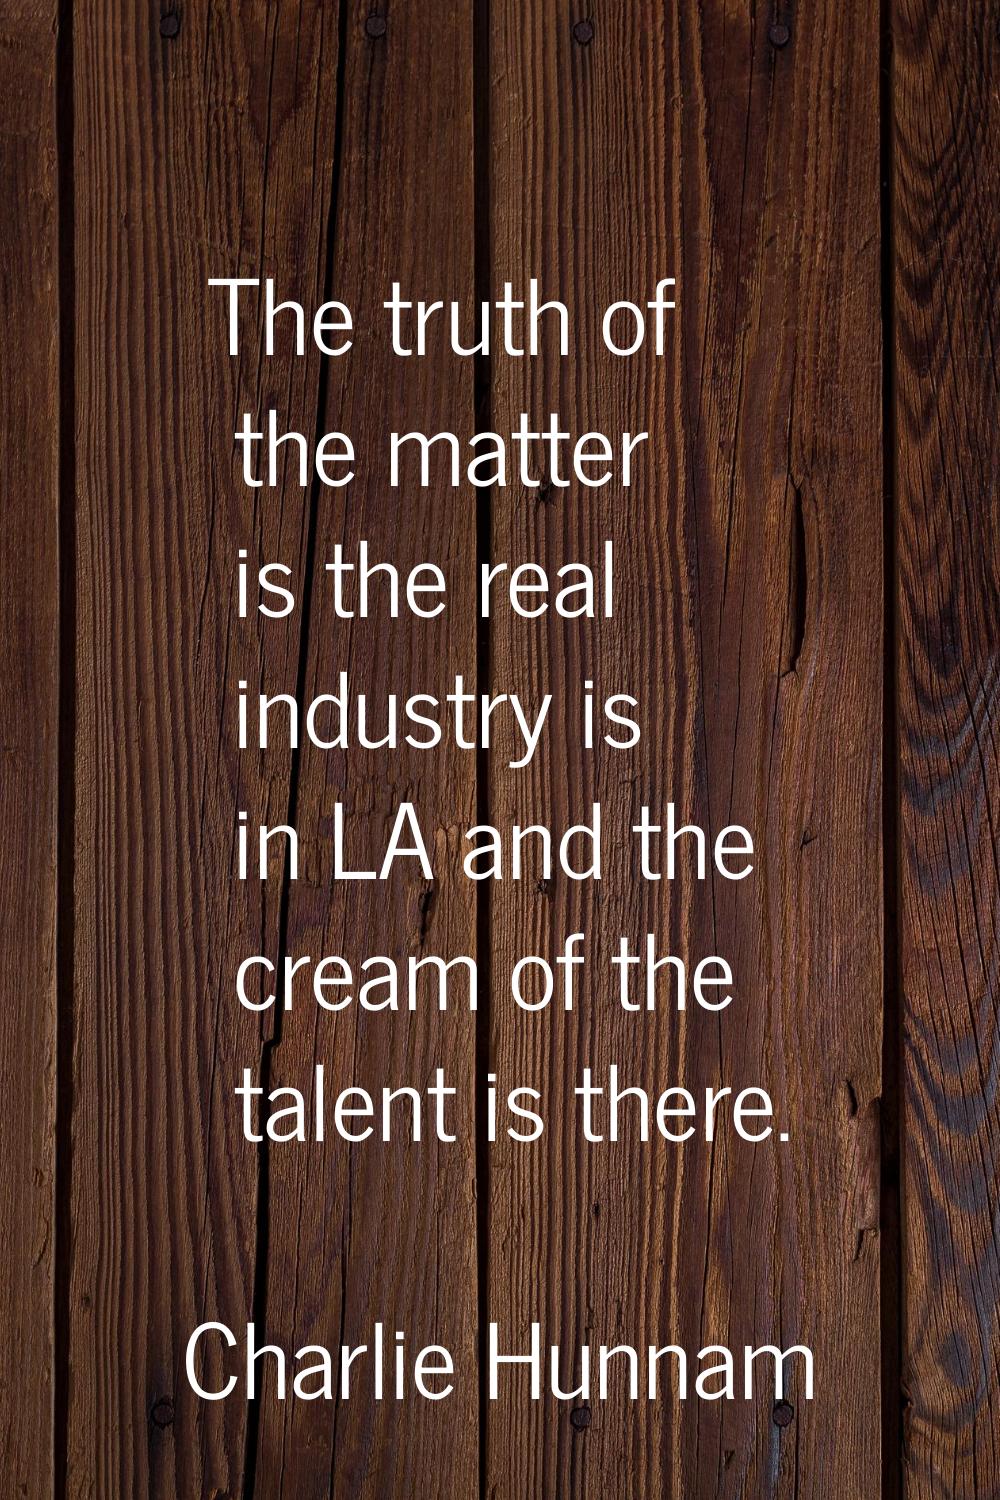 The truth of the matter is the real industry is in LA and the cream of the talent is there.